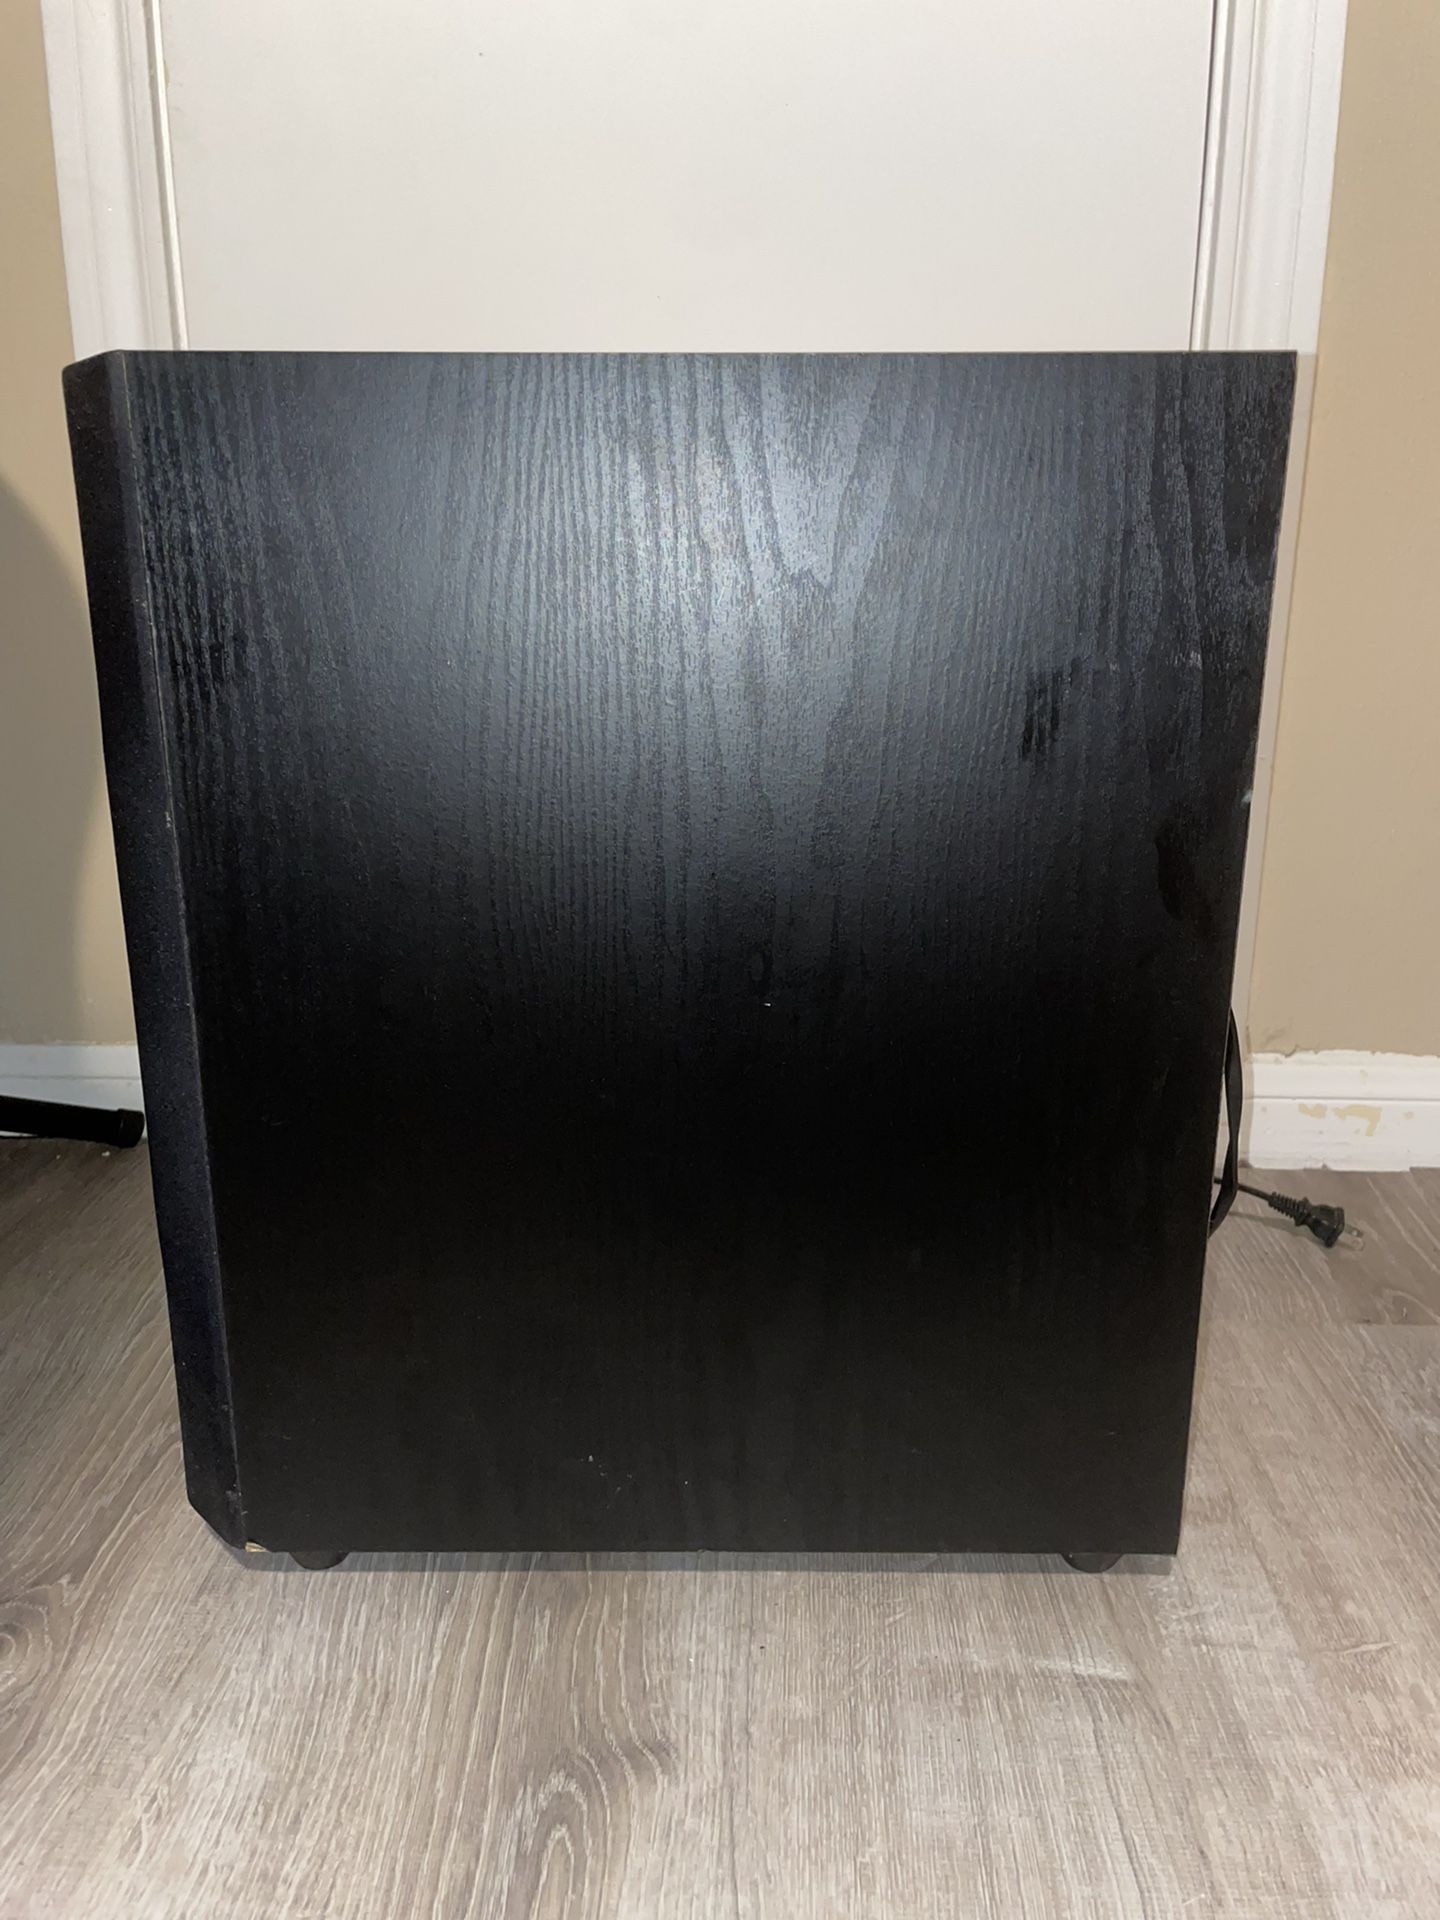 Onkyo SKW-540 Powered Subwoofer Open To Offers! 